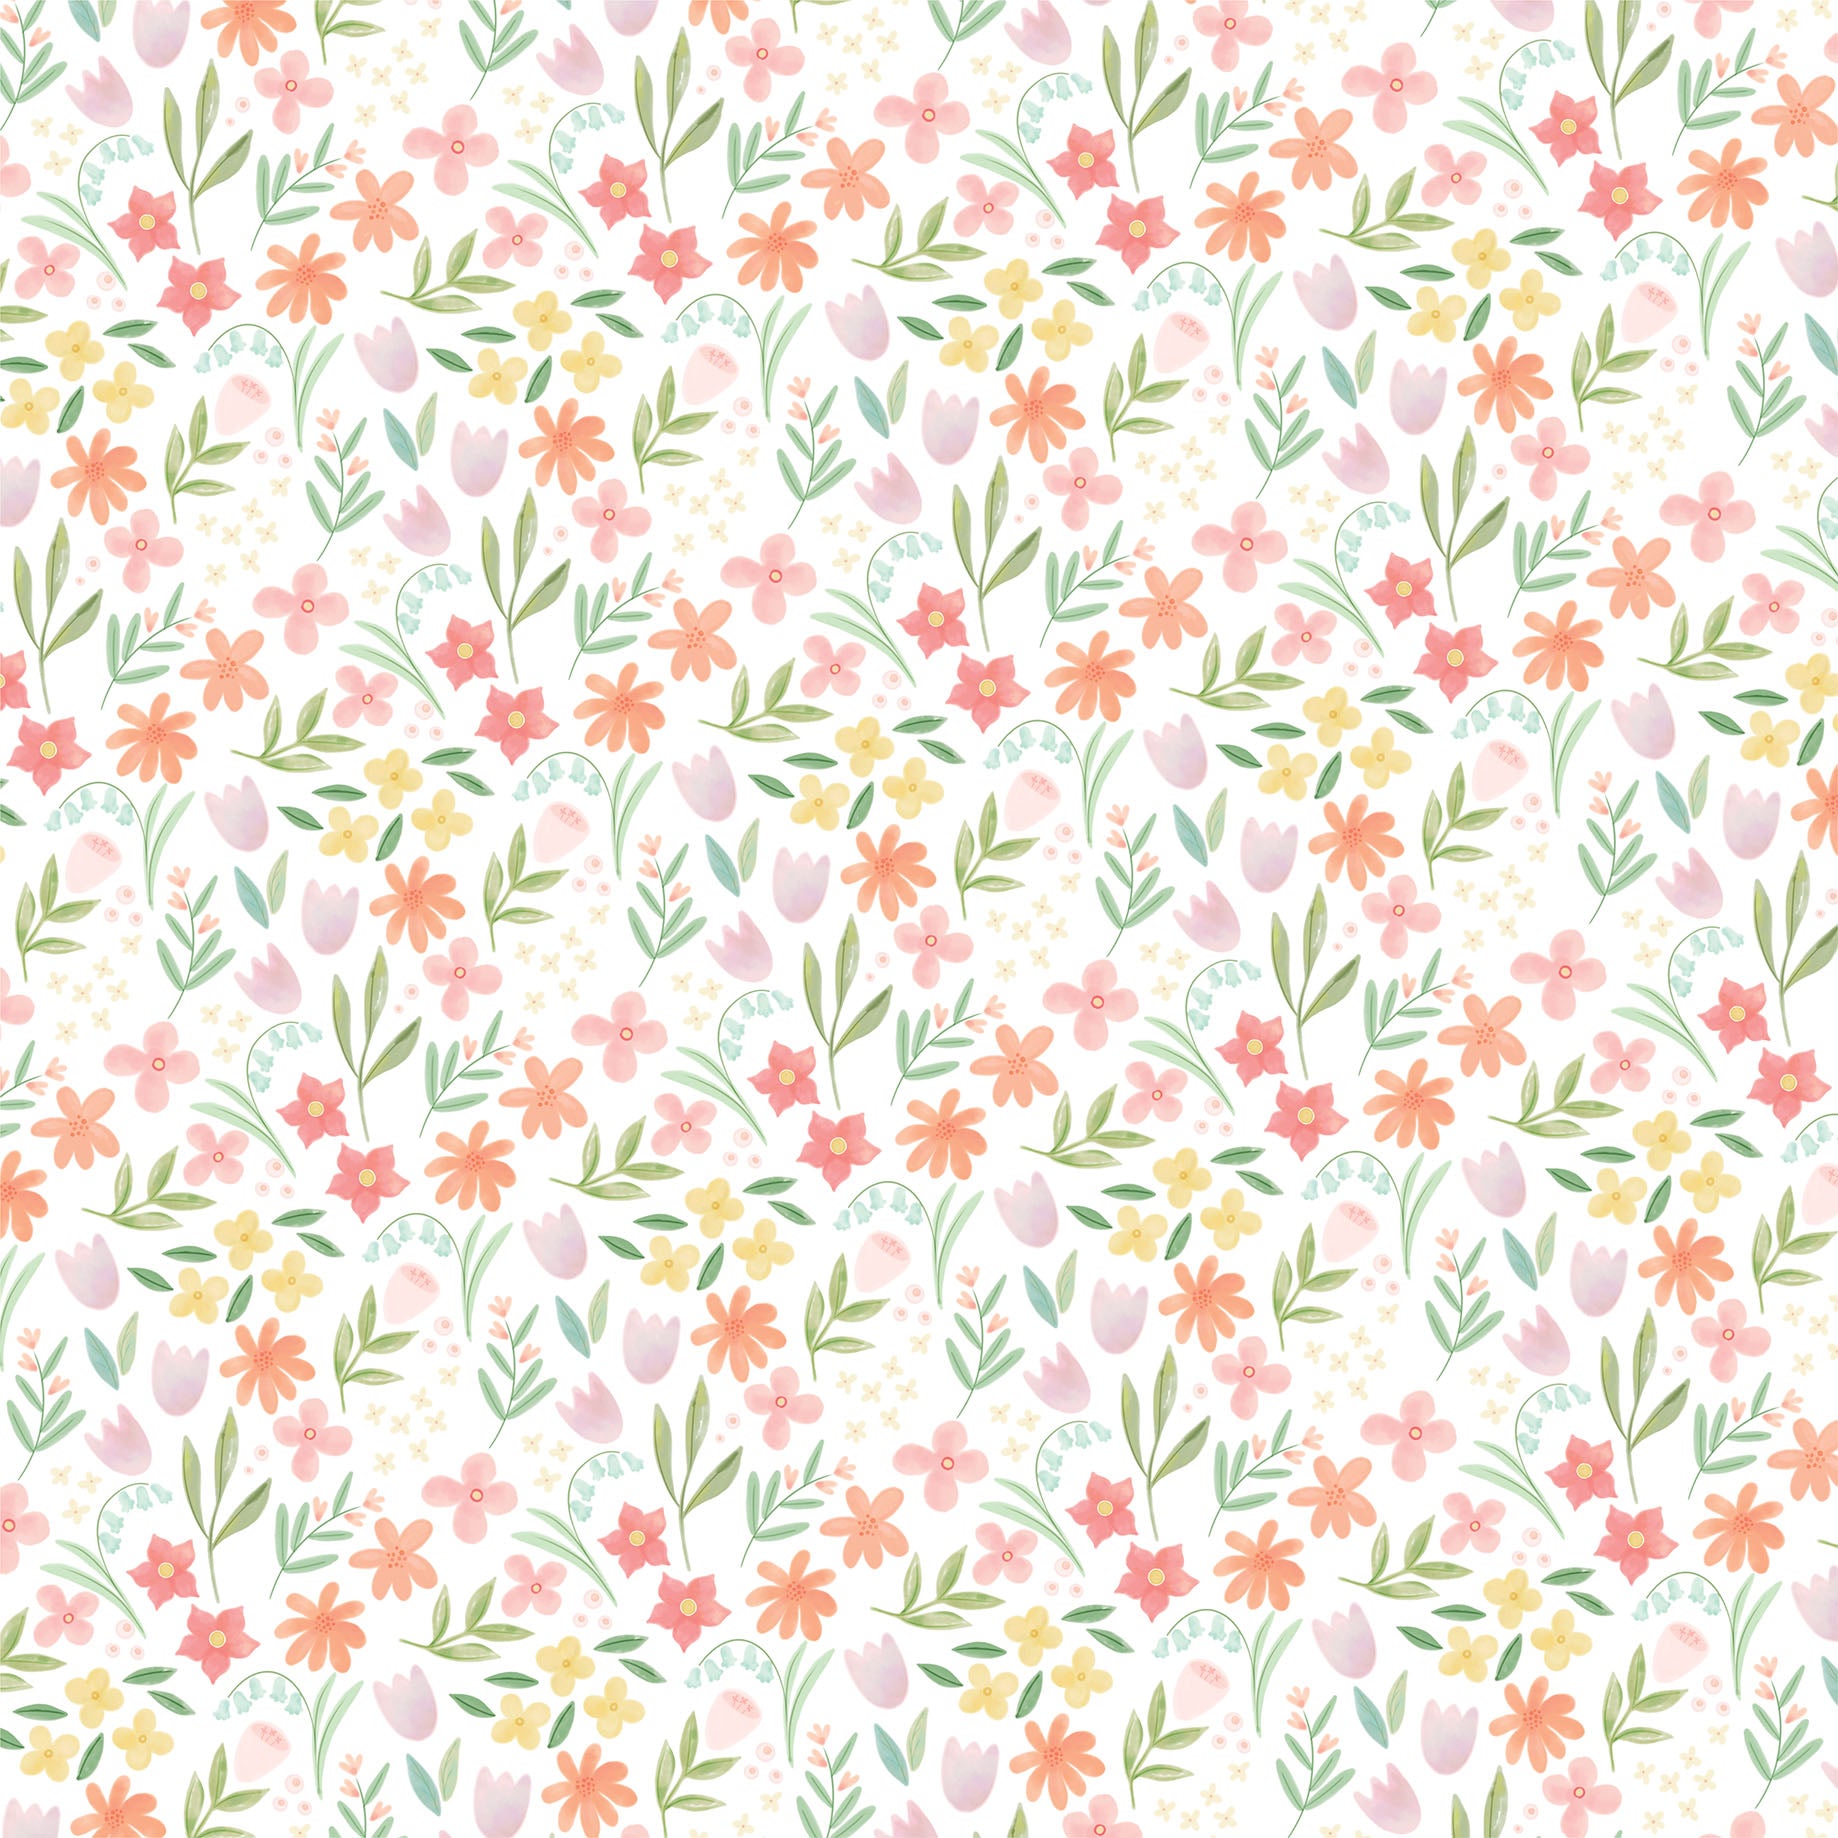 Here Comes Easter Collection Easter Blooms 12 x 12 Double-Sided Scrapbook Paper by Carta Bella